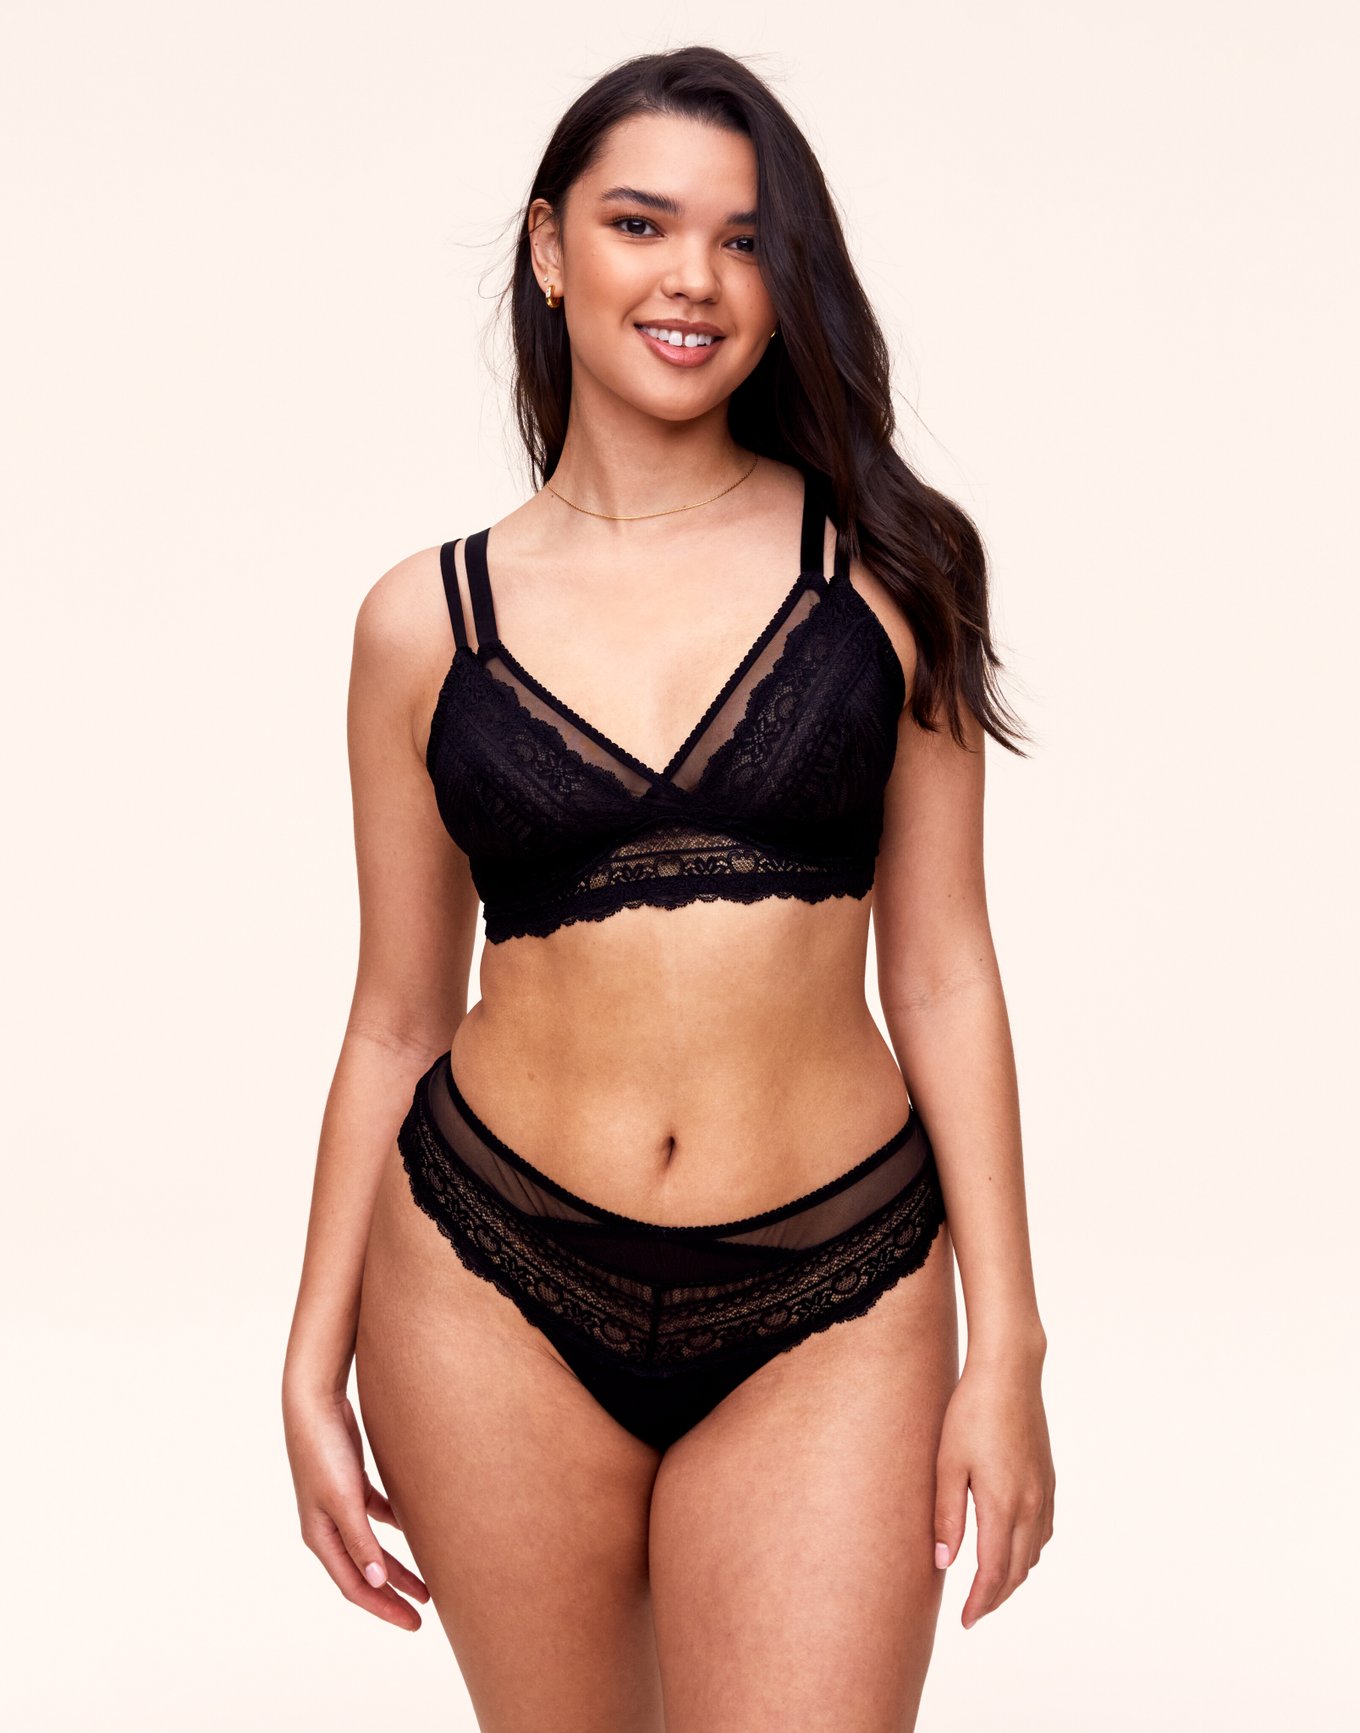 11 Affordable Bralettes – Amazing Lace